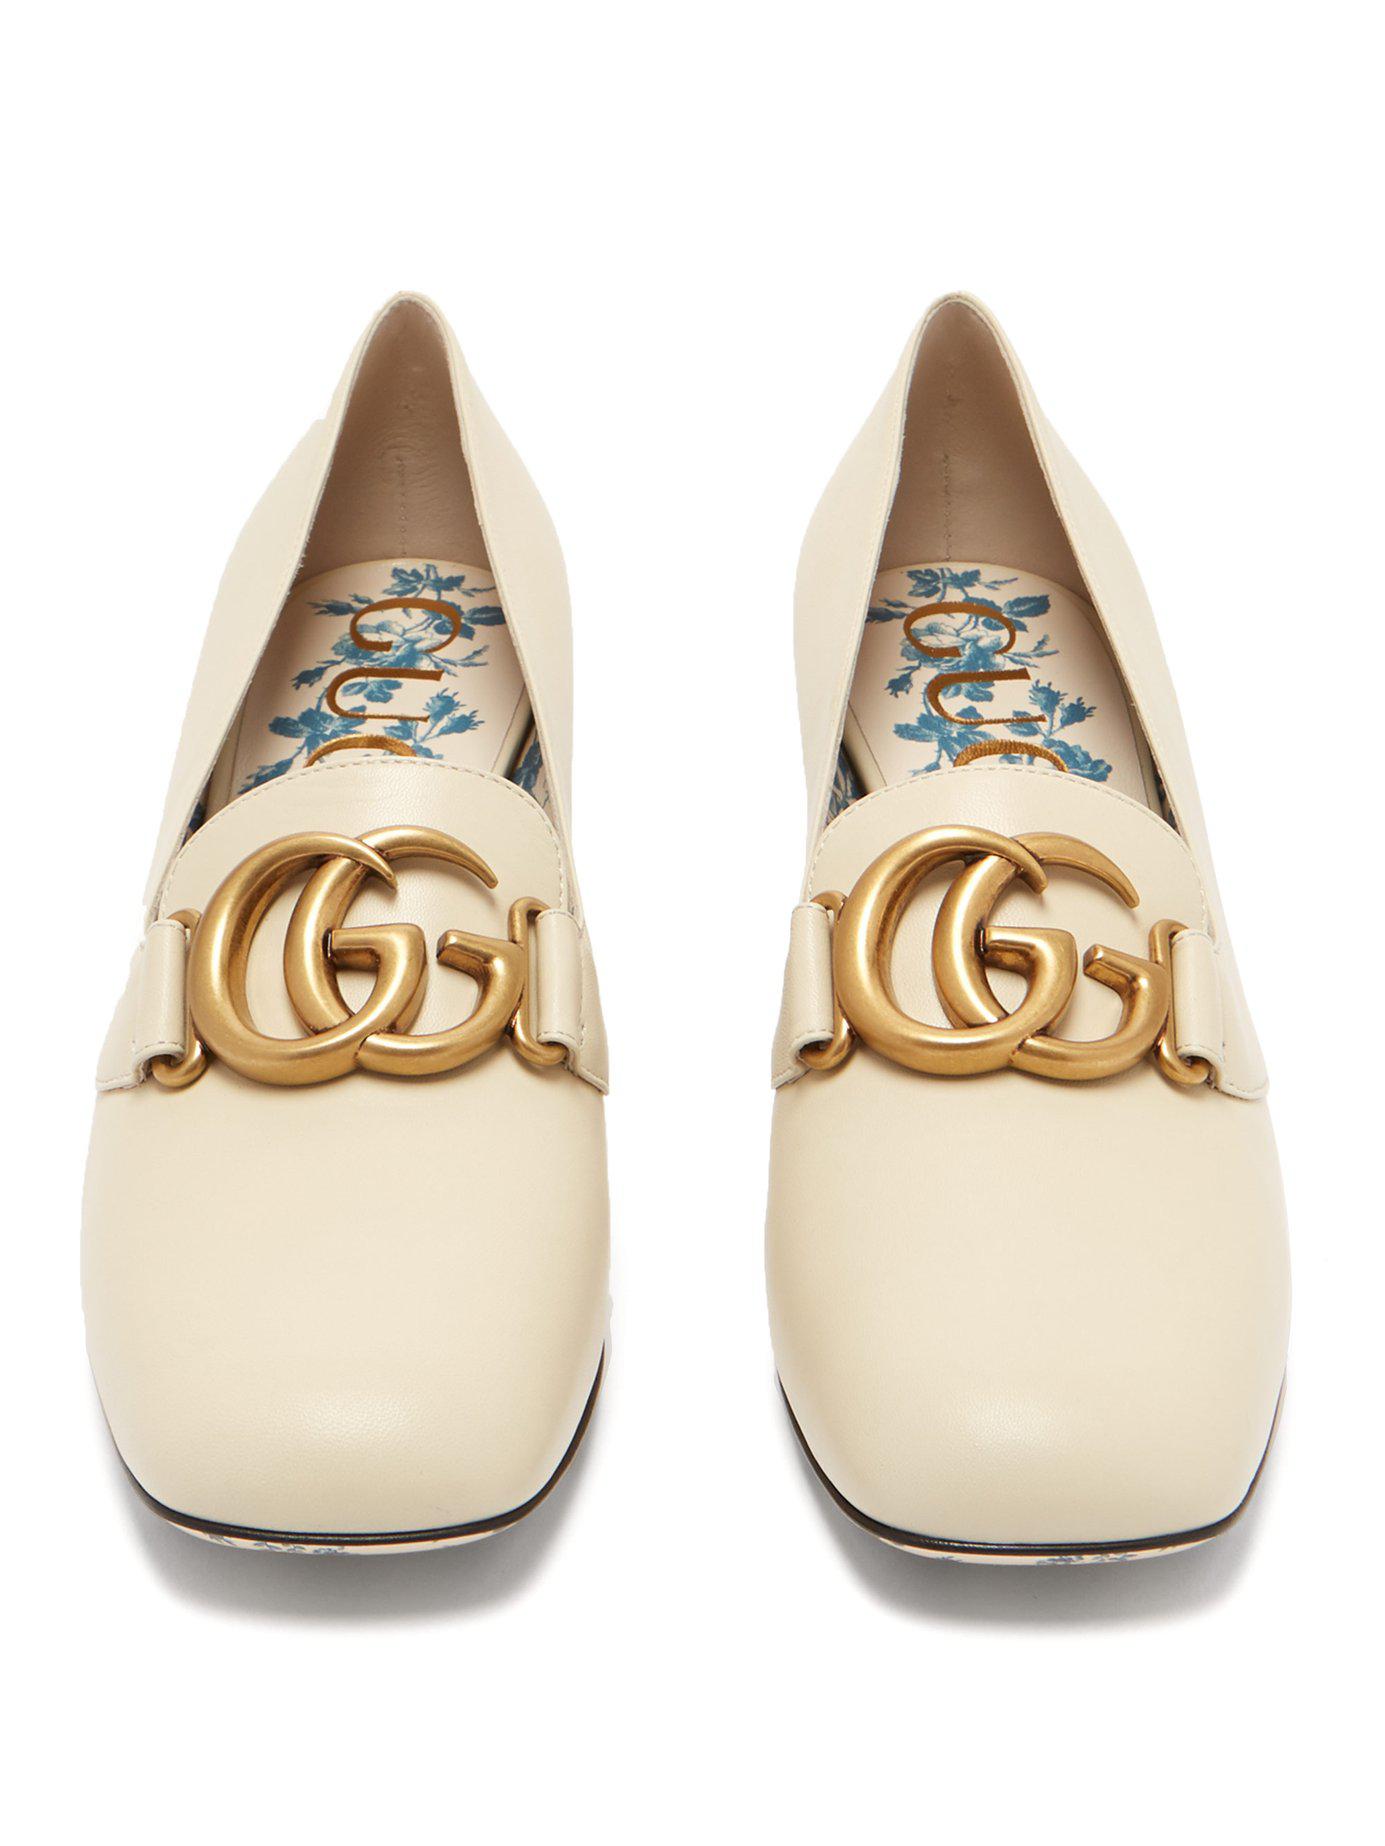 Gucci Cream Matelasse Leather GG Marmont Loafers Size 38 Gucci